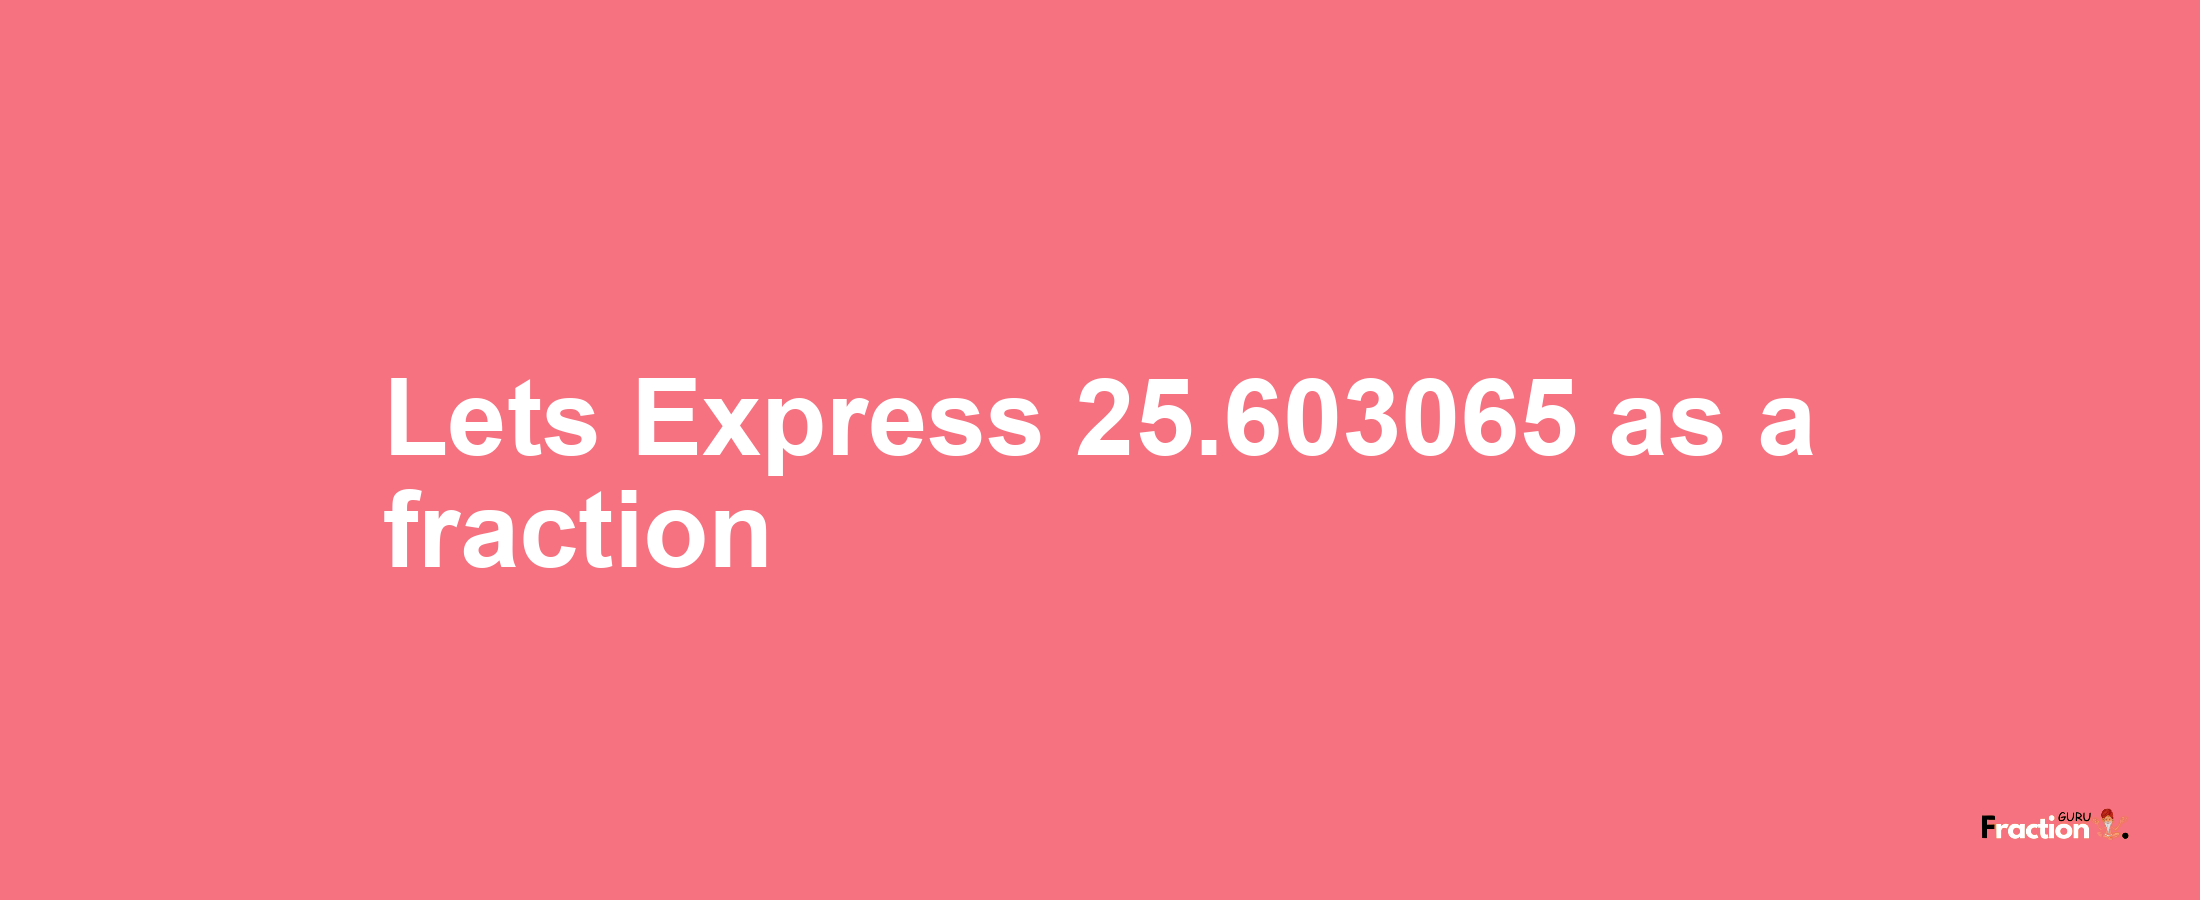 Lets Express 25.603065 as afraction